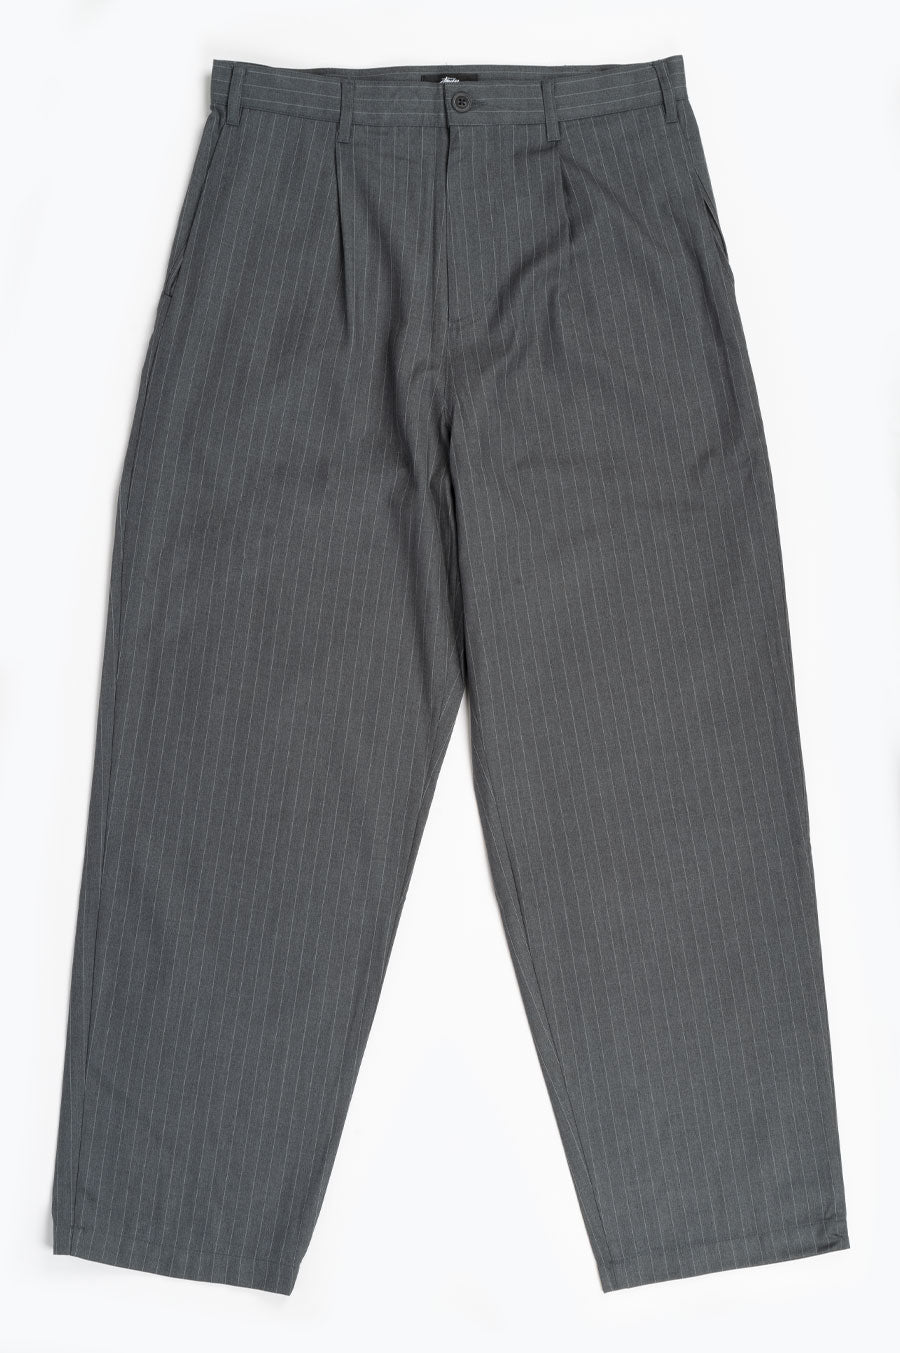 STUSSY STRIPED VOLUME PLEATED TROUSER GREY